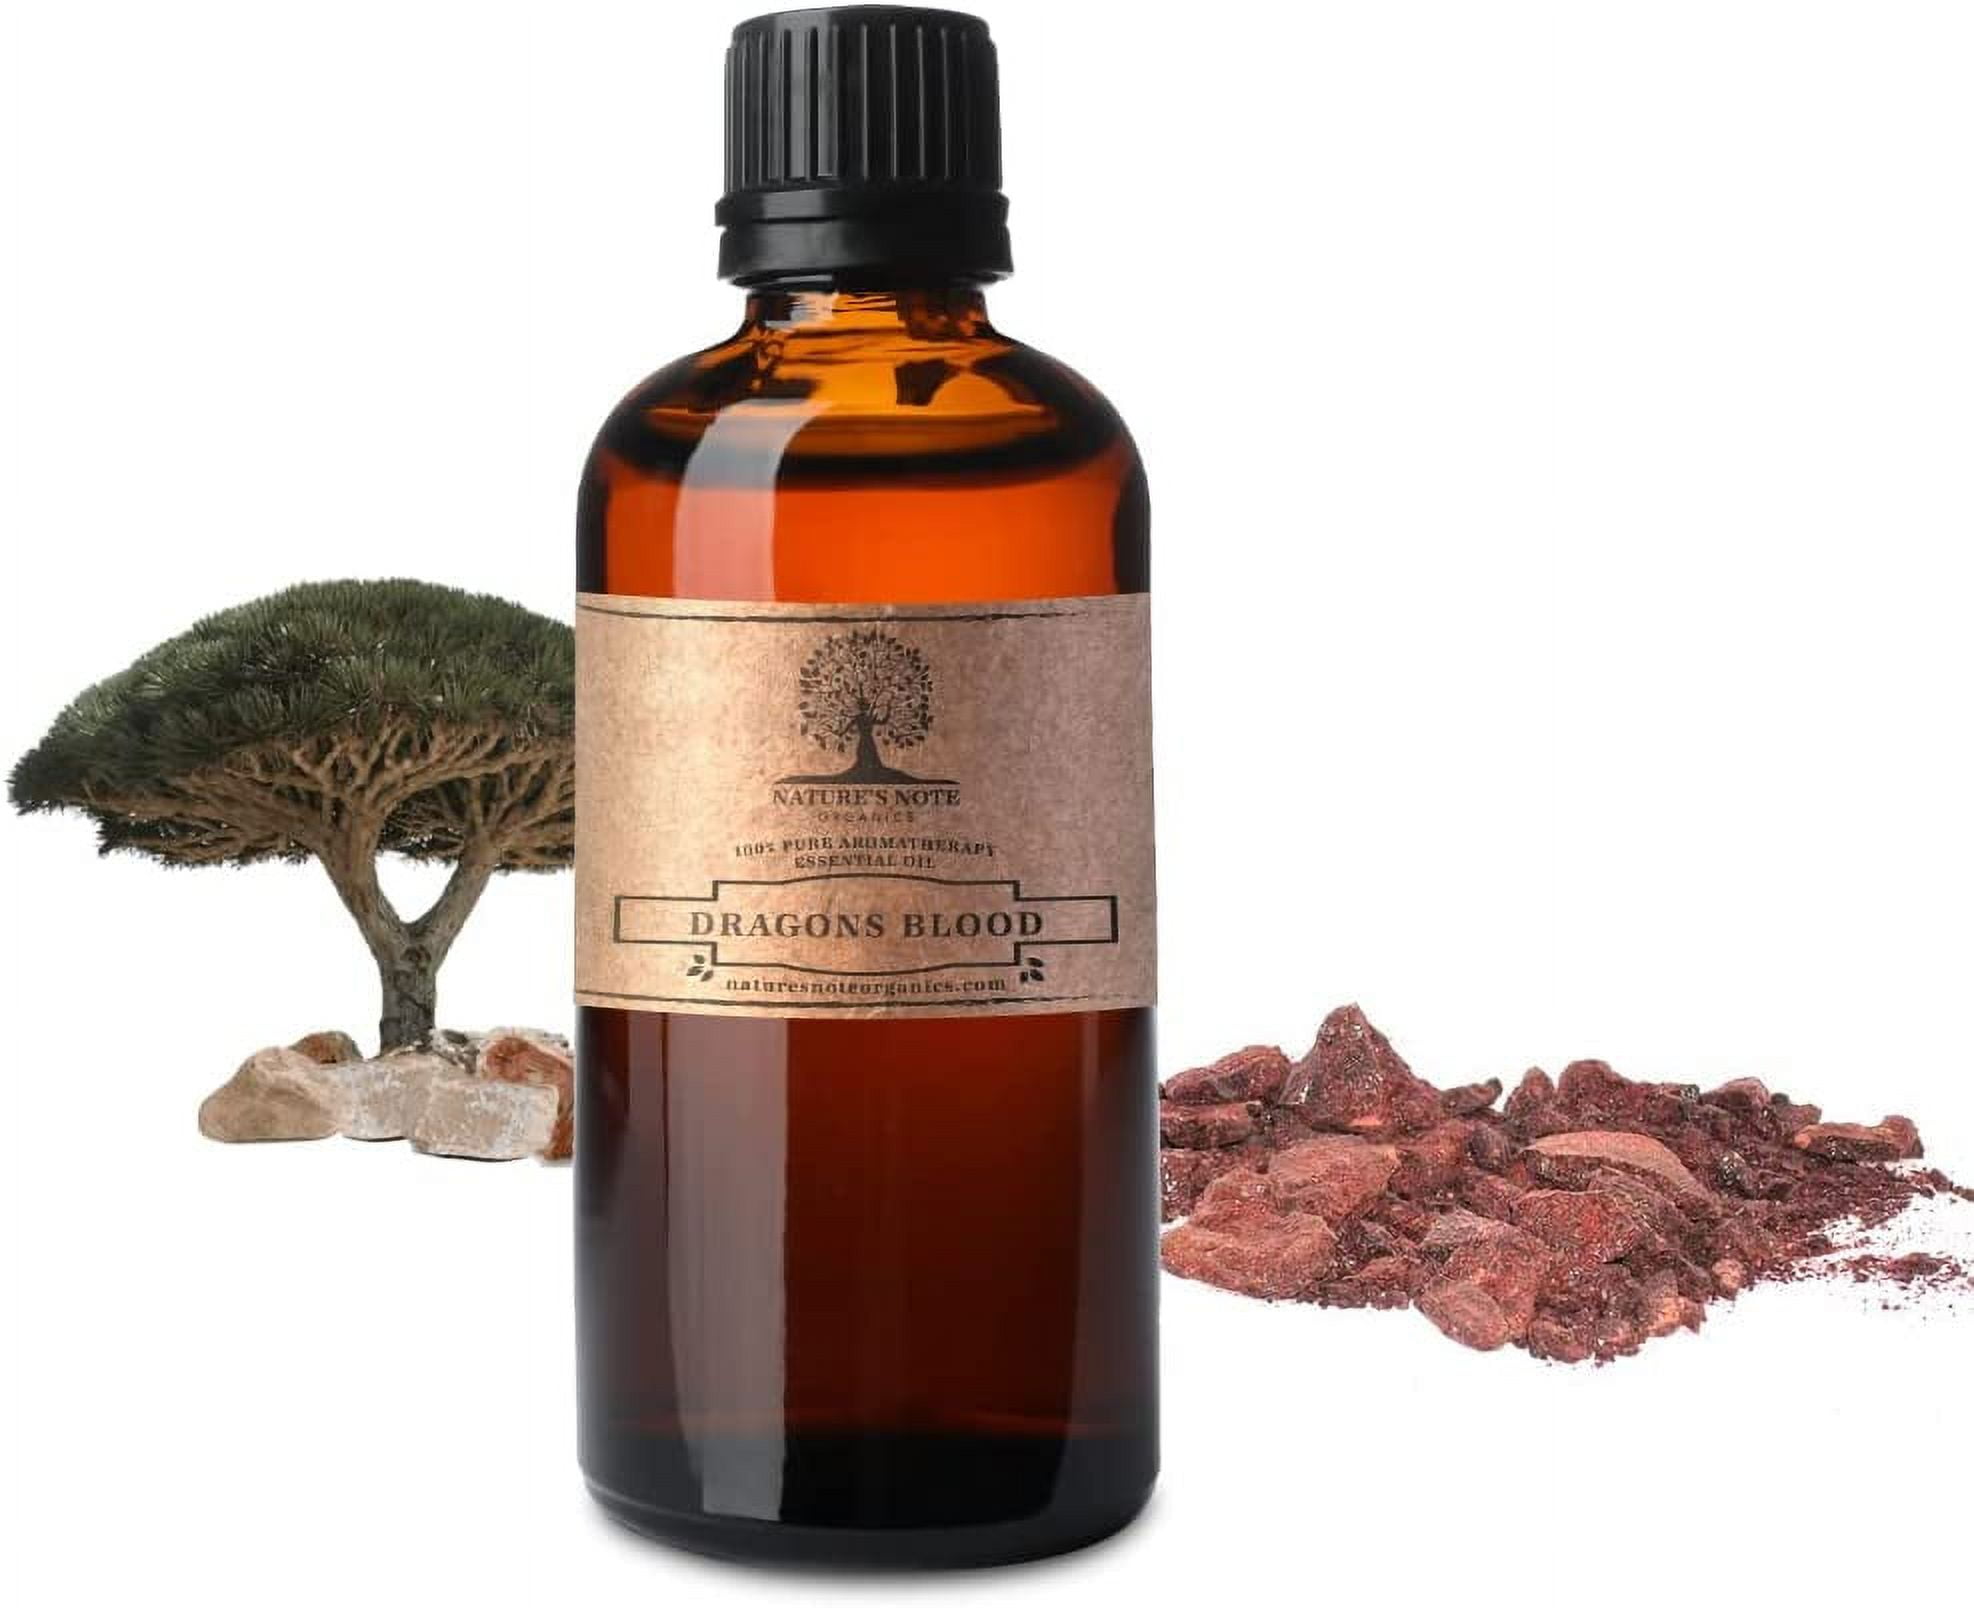 Dragons Blood Fragrance Oil — The Essential Oil Company